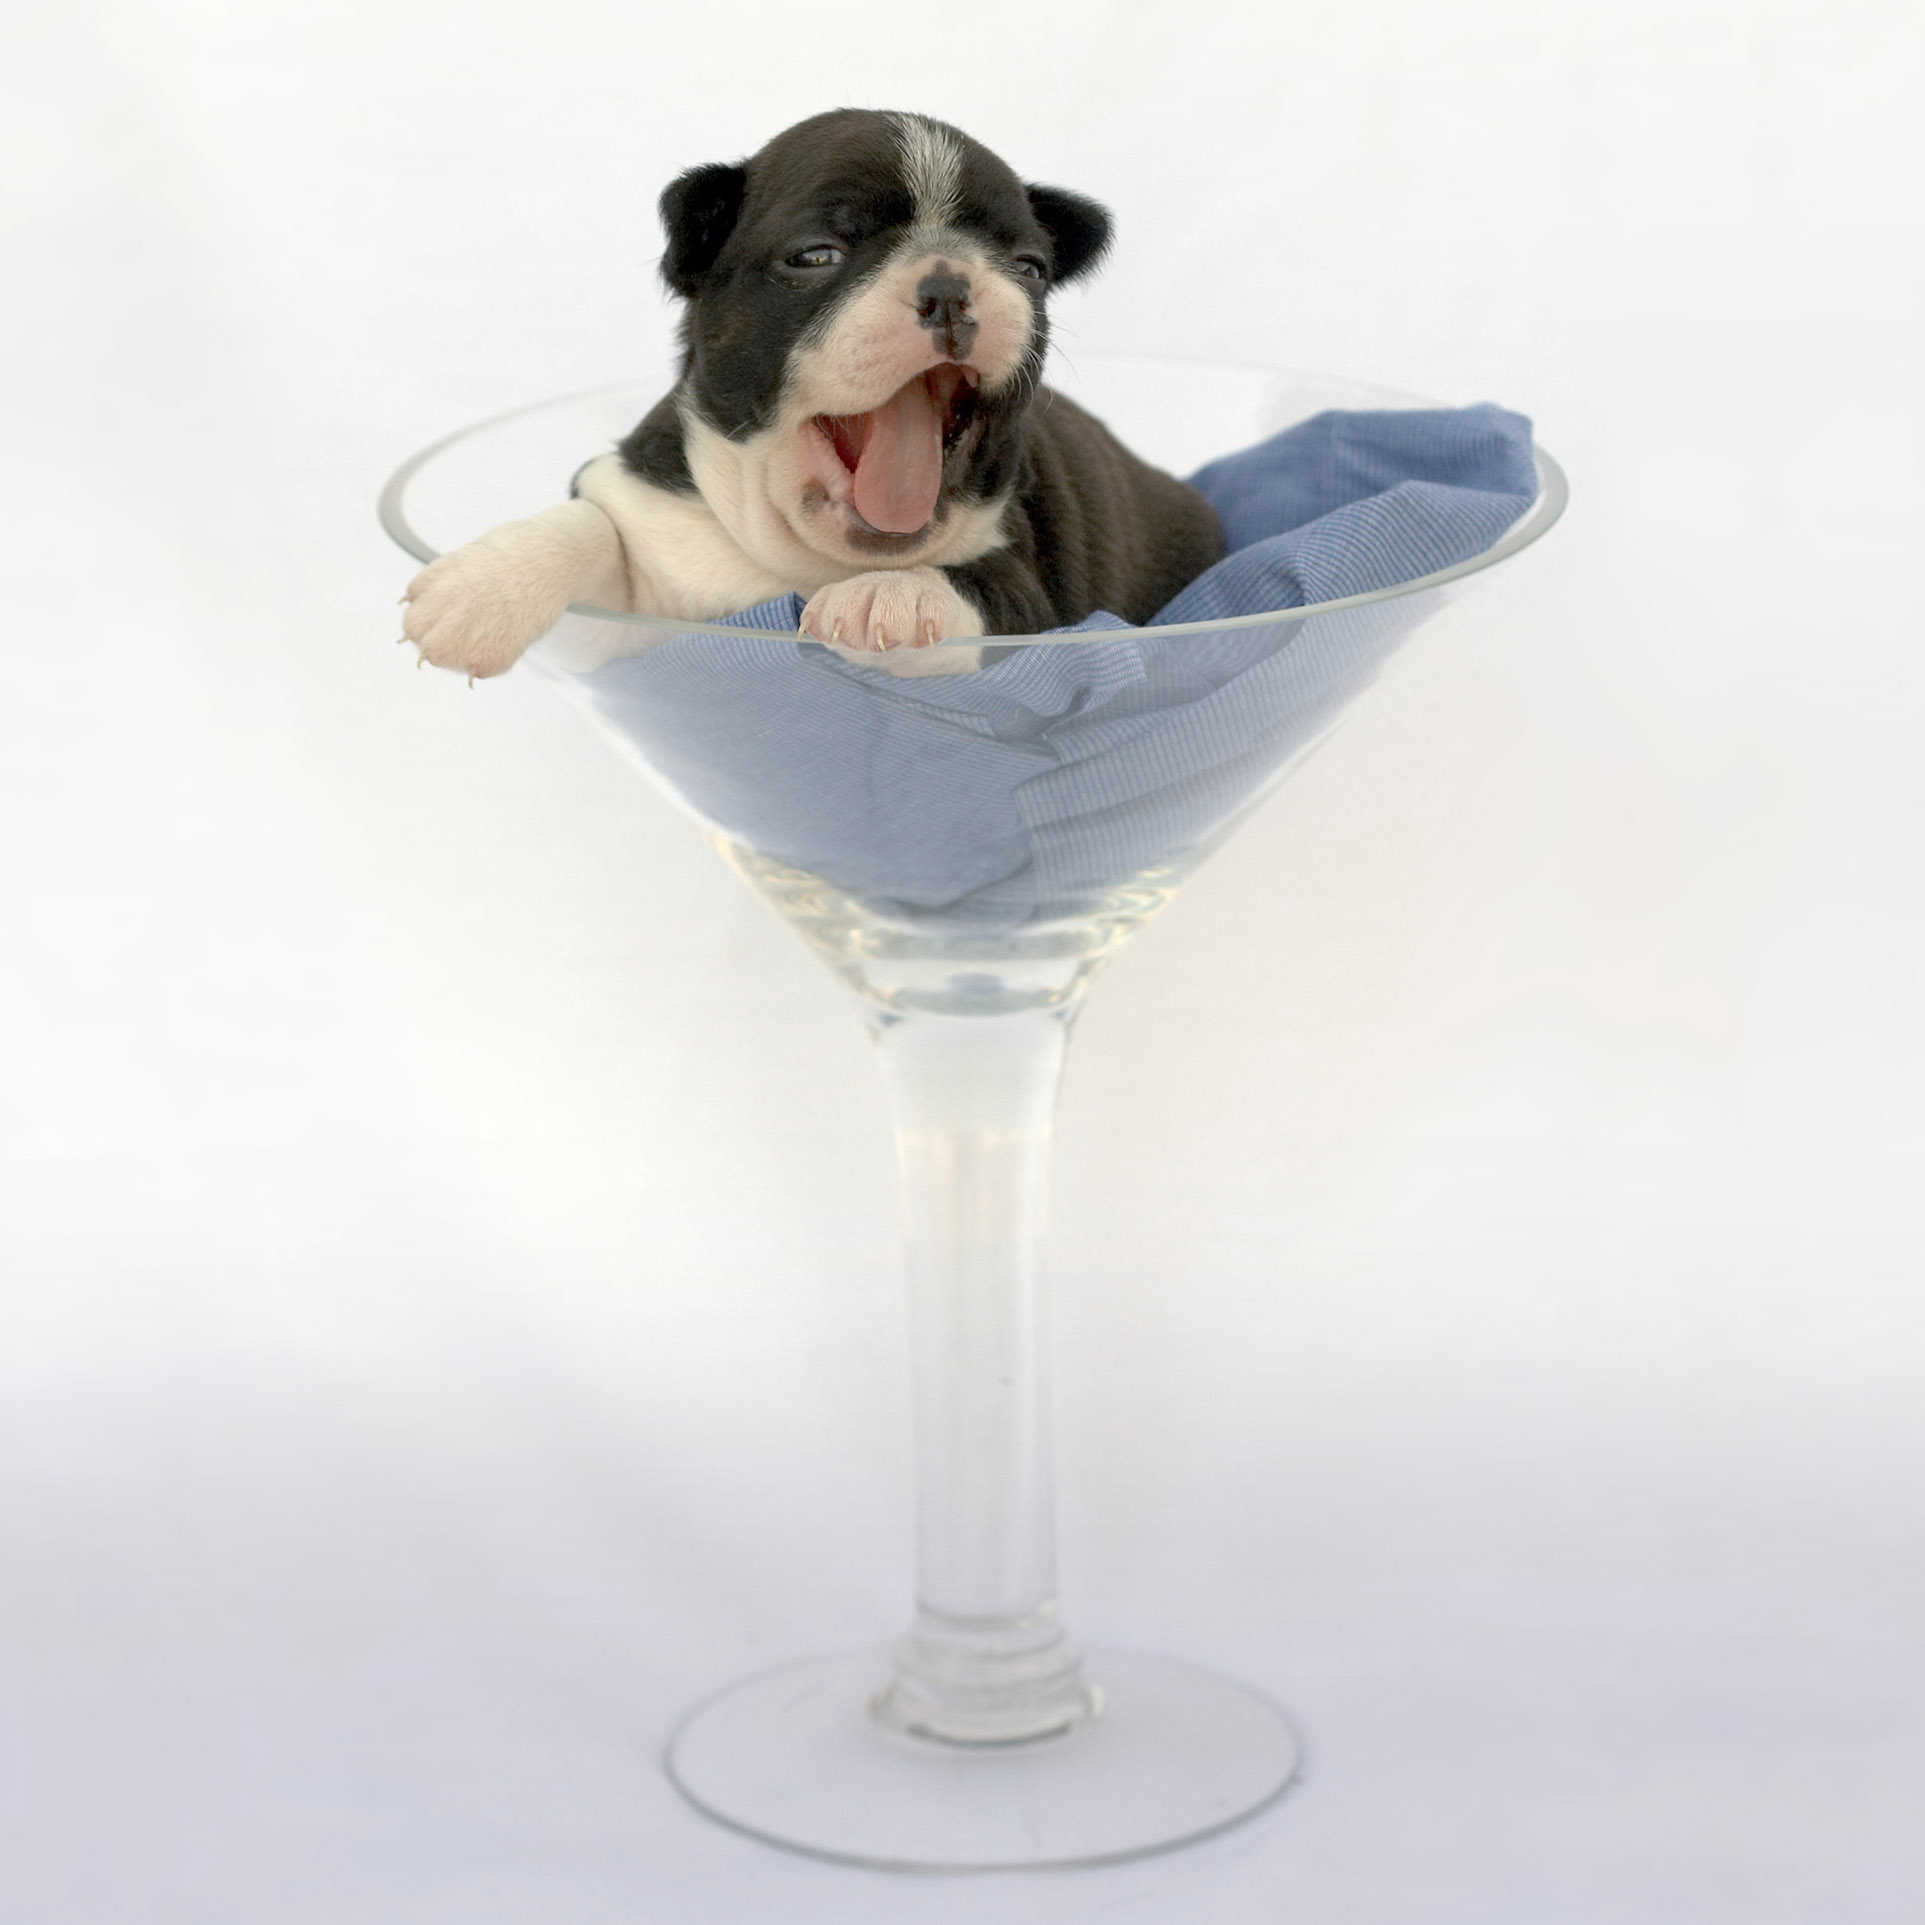 sleepy dog in a cocktail glass